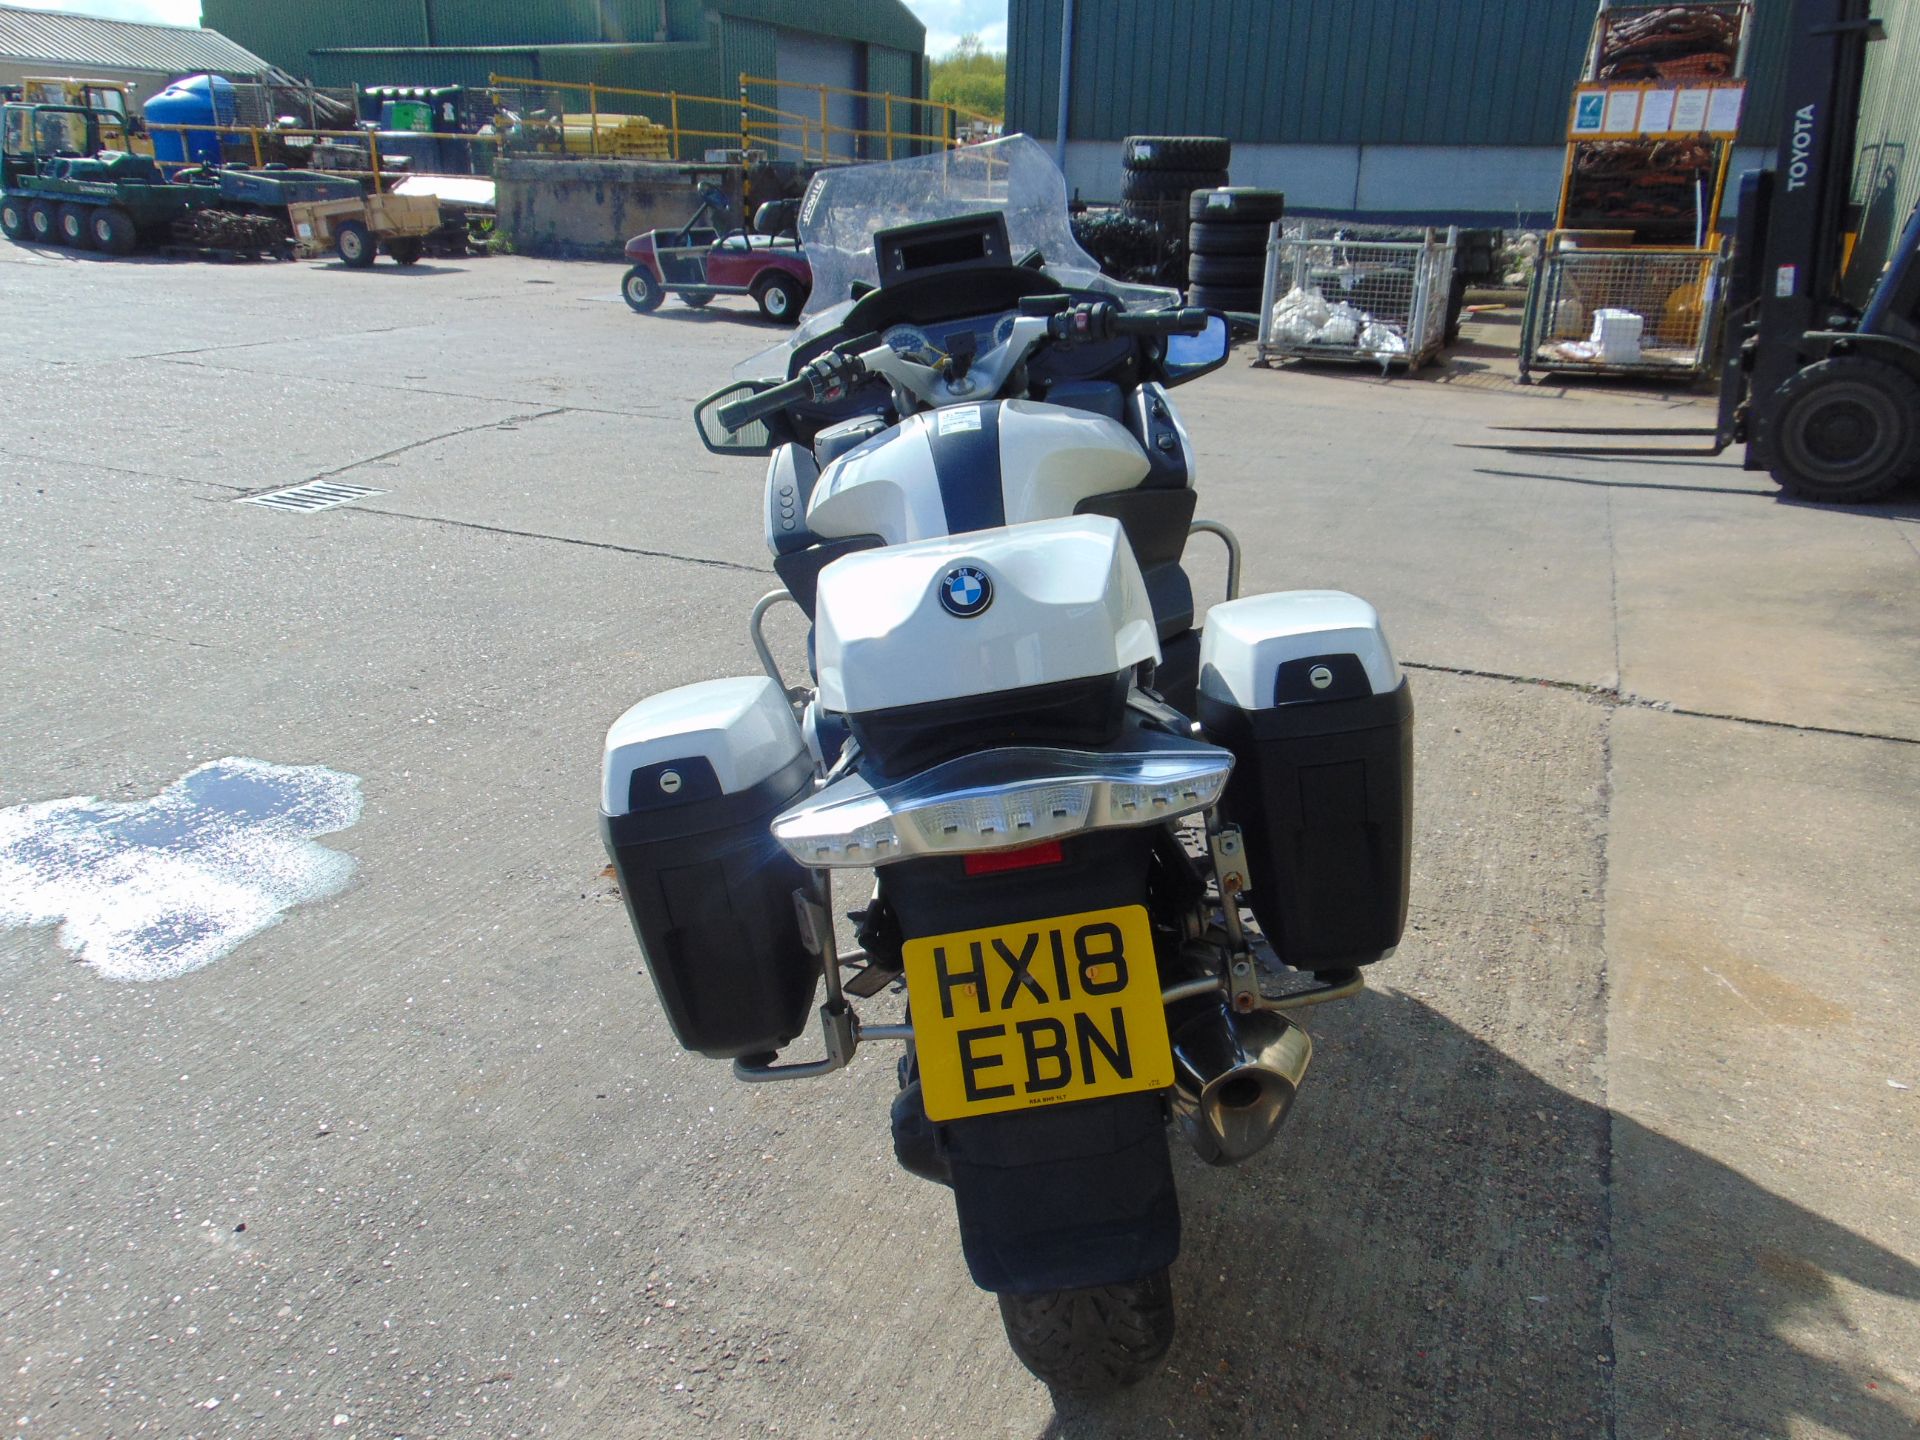 2018 BMW R1200RT Motorbike 50,000 miles from UK Police - Image 8 of 38